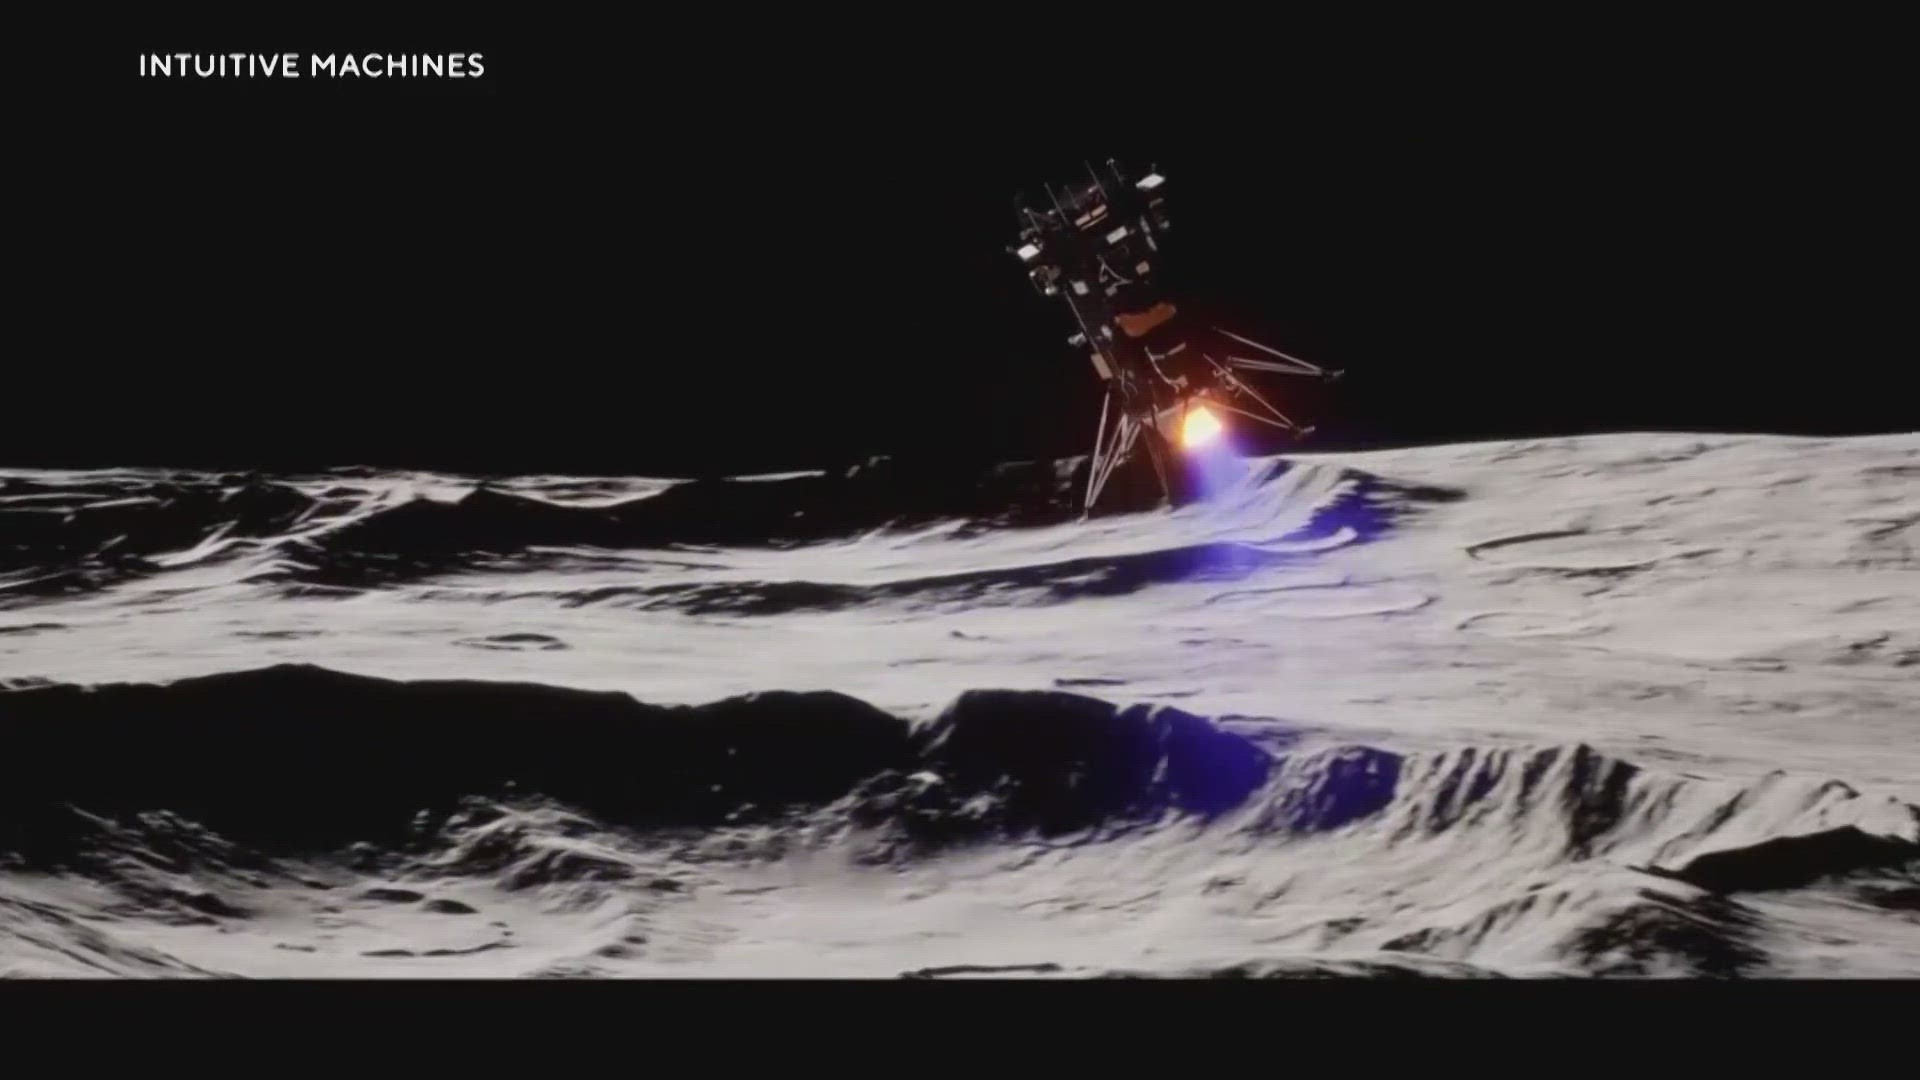 Intuitive Machines became the first-ever private company to land a spacecraft on the moon with its Odysseus craft.